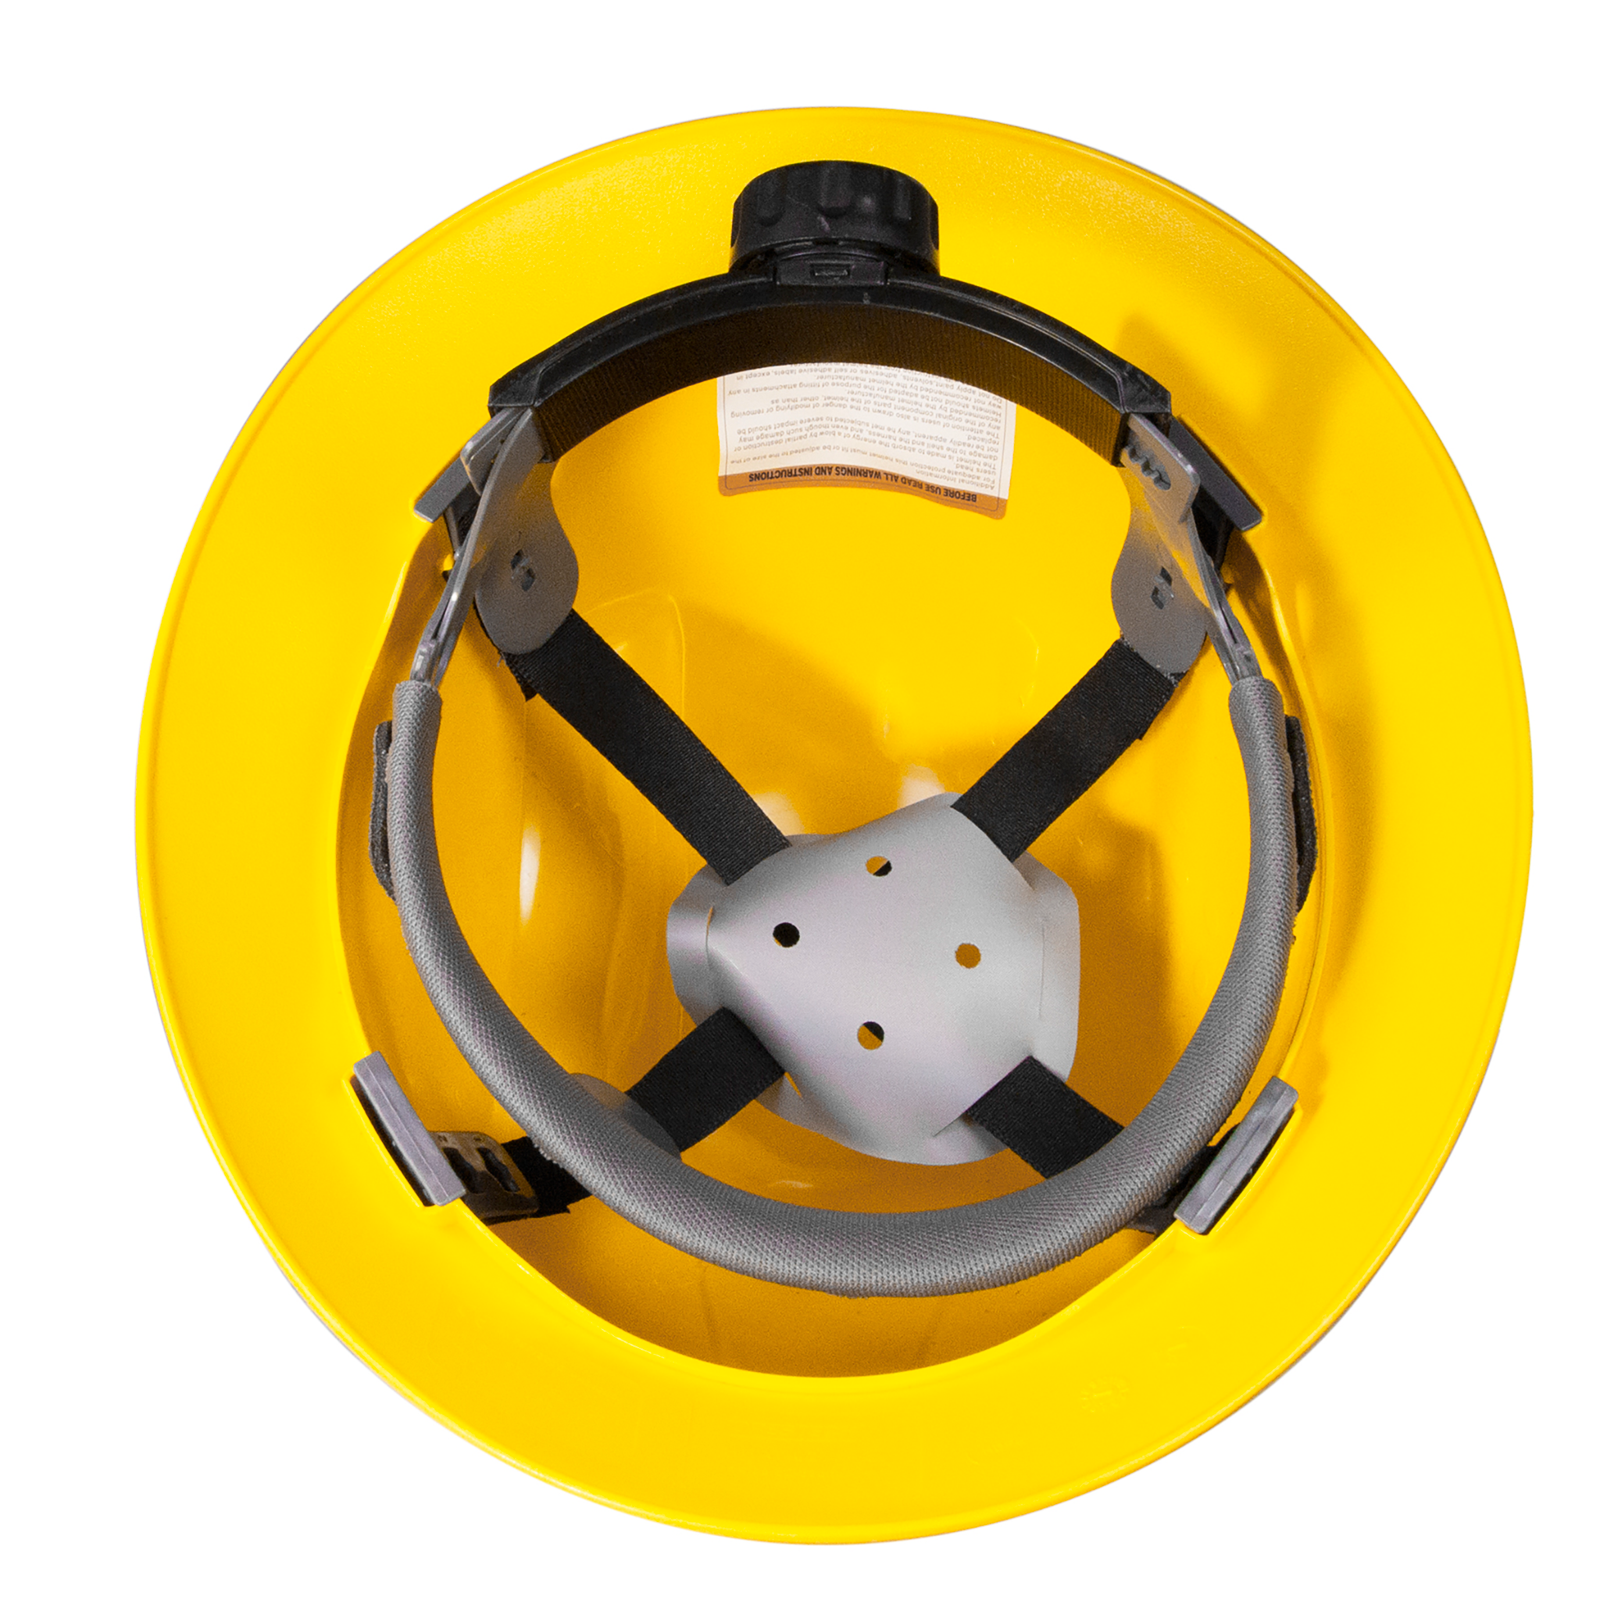 Showing the inside part of the JORESTECH safety hard hat, the ratchet and the 4 points suspension installed